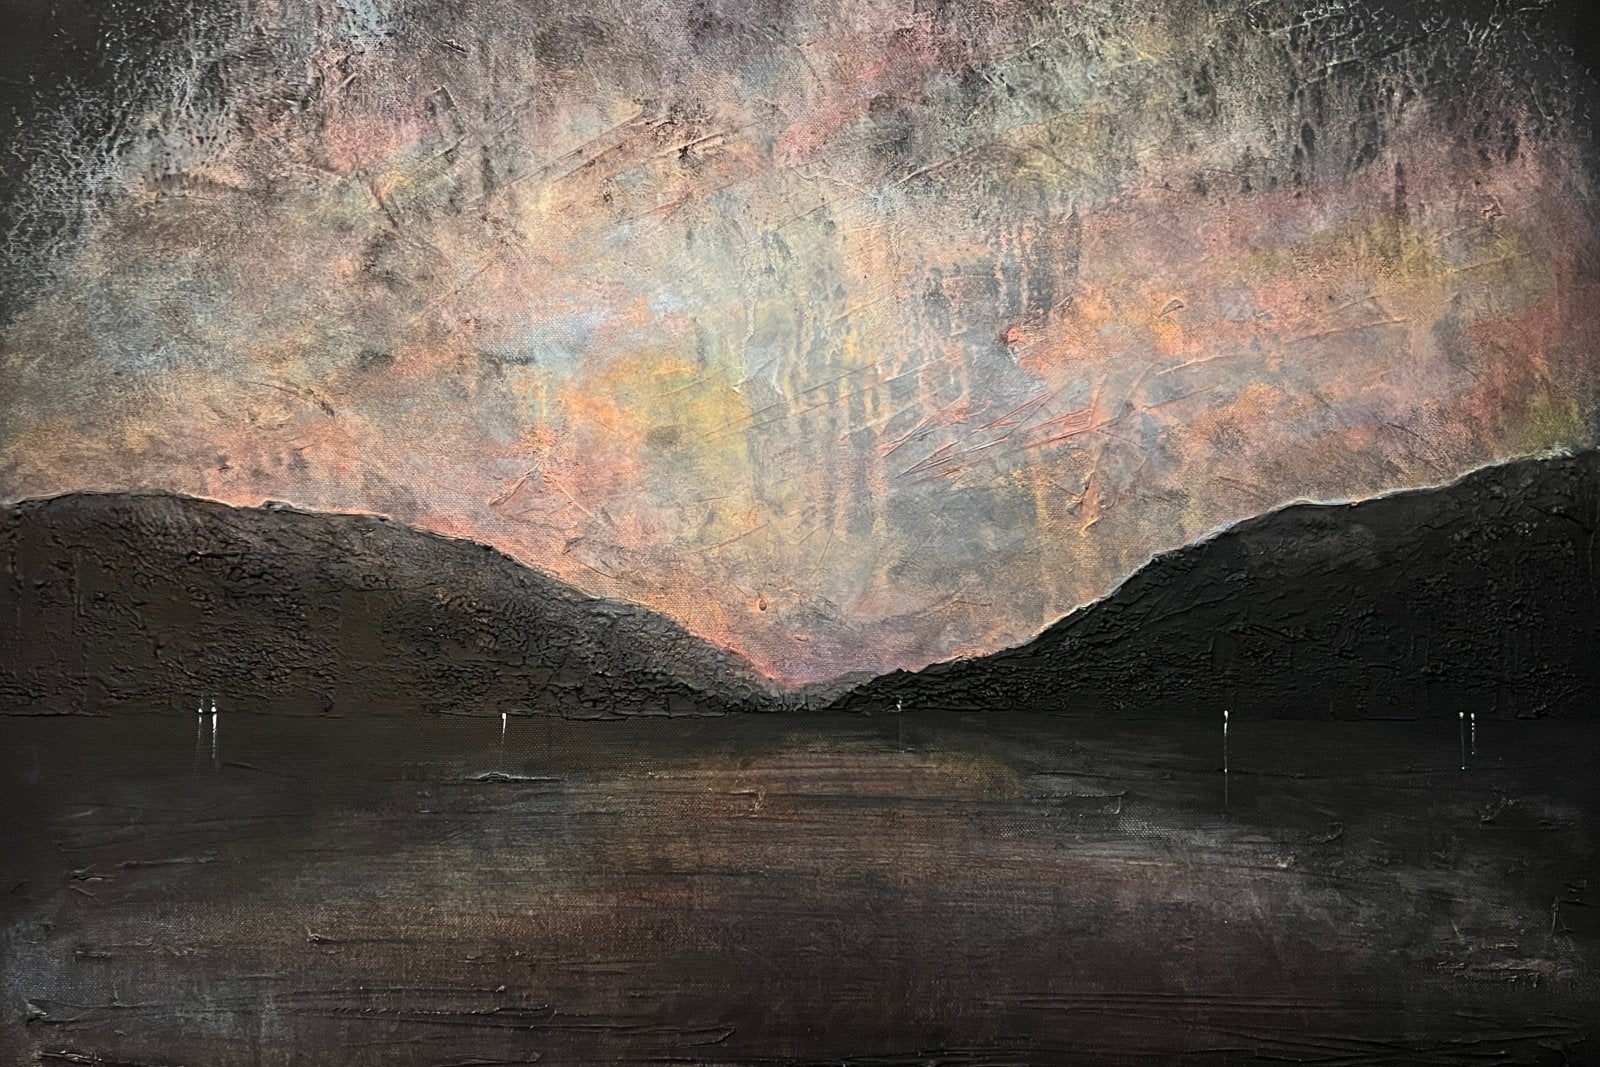 A Brooding Loch Lomond-Signed Art Prints By Scottish Artist Hunter-Scottish Lochs & Mountains Art Gallery-Paintings, Prints, Homeware, Art Gifts From Scotland By Scottish Artist Kevin Hunter